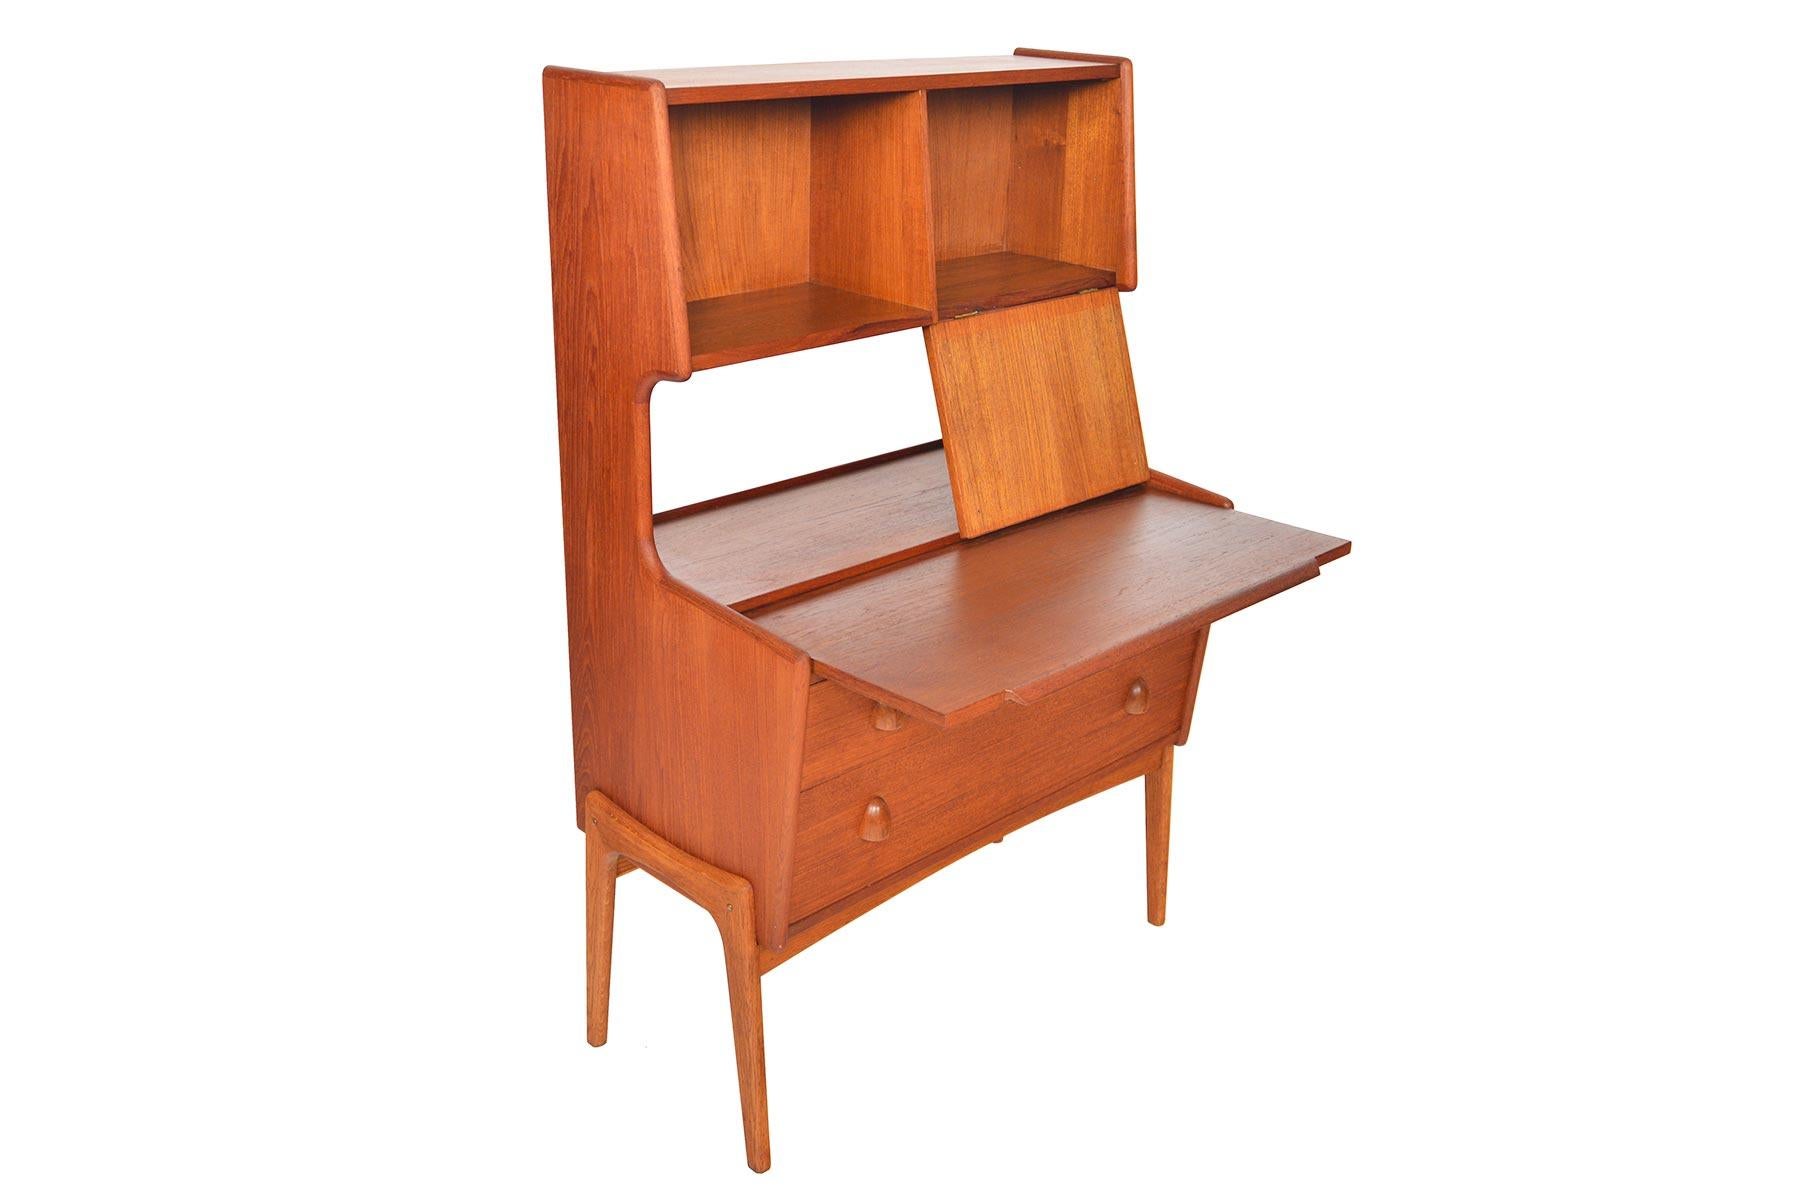 This Danish modern secretary desk offers a light and airy profile. This two-tier design features two upper compartments with a drop down door. The desk surface extends forward to provide a work space. Two lower drawers provide additional storage.